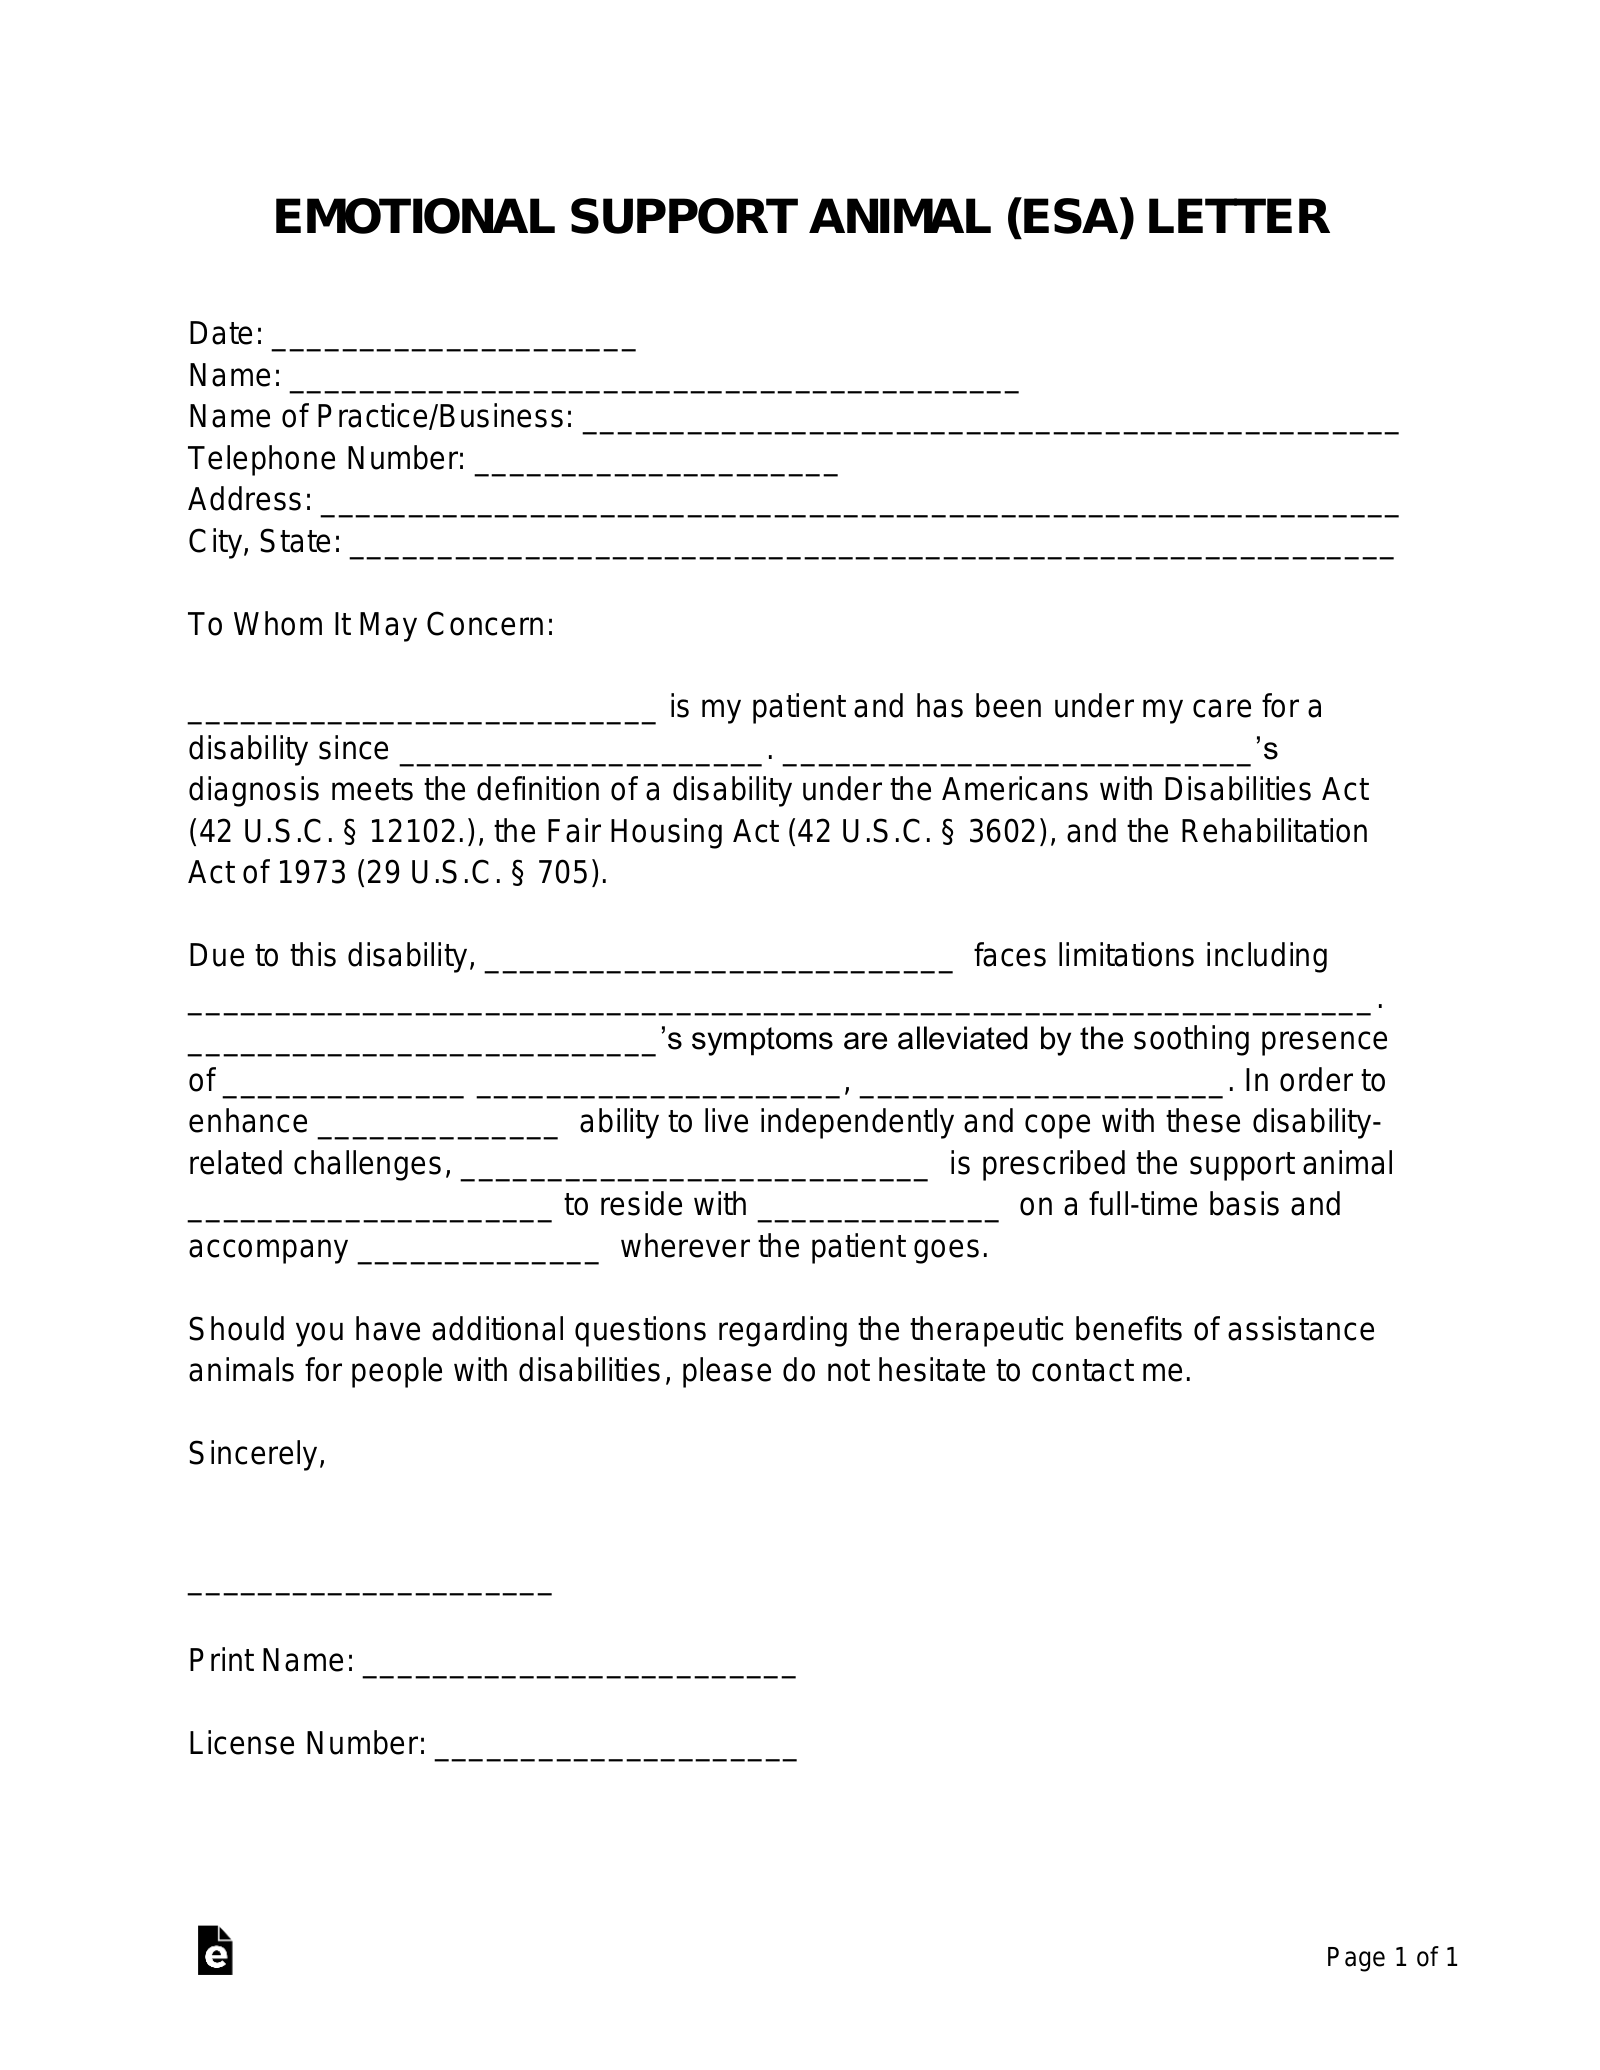 Free Emotional Support Animal (ESA) Letter Template PDF Word